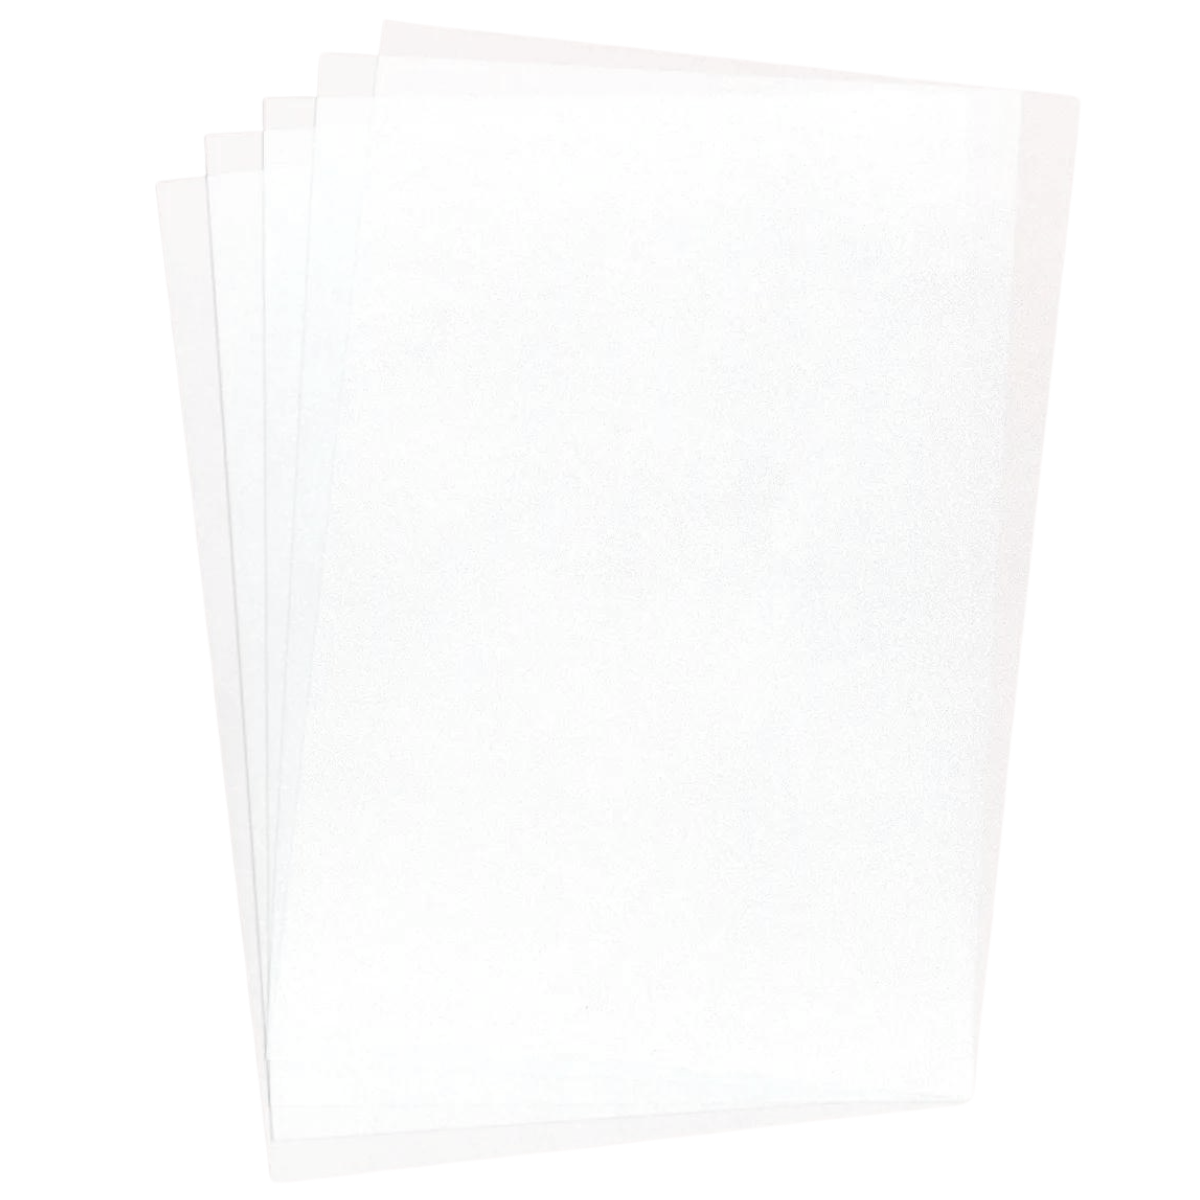 paper2eat Wafer Paper - 0.40 mm thick - 25 sheets only $15.99 